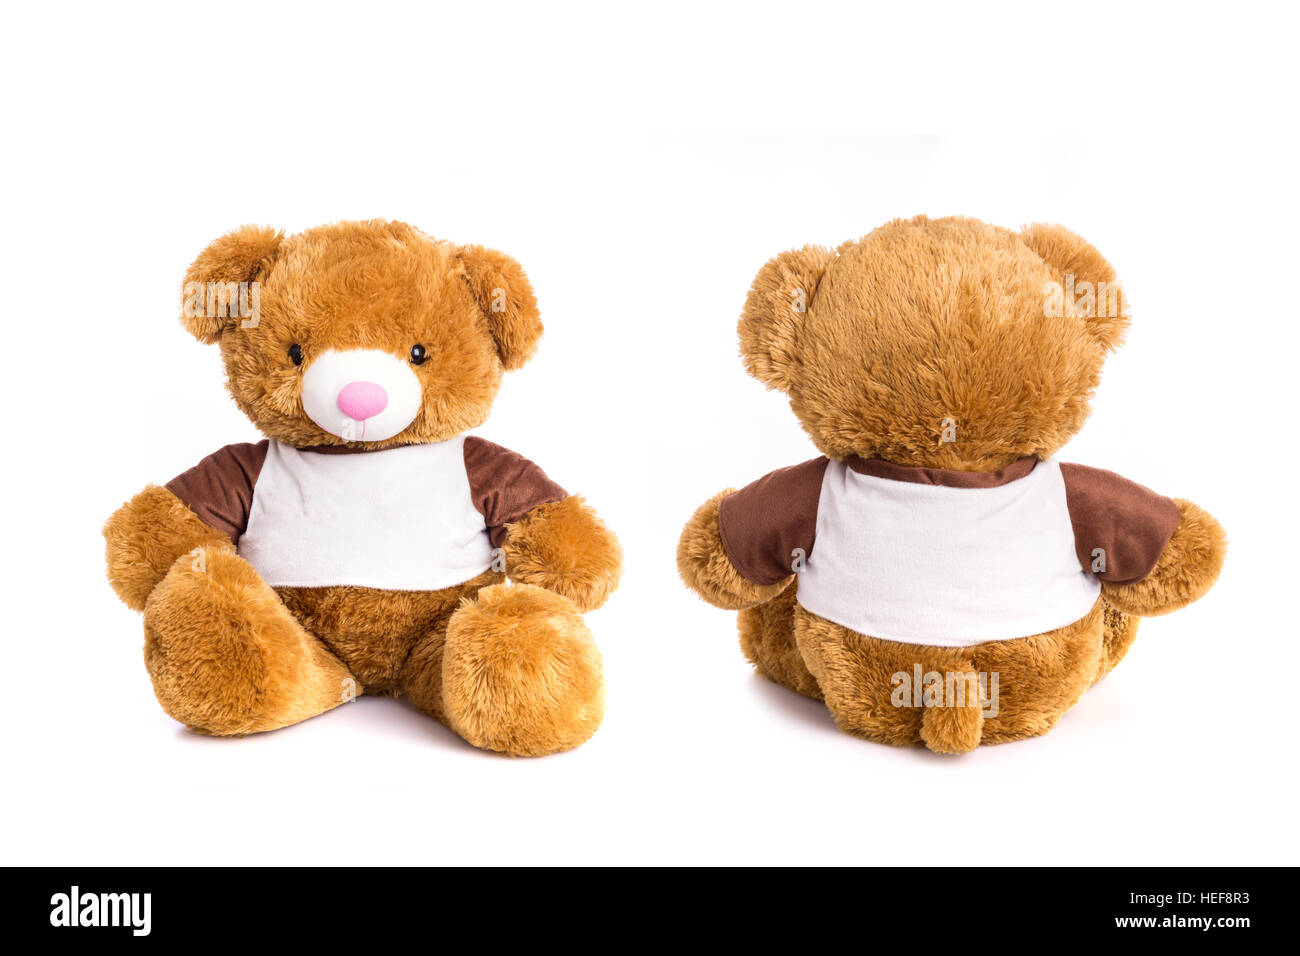 Big toy brown bear isolated on white background Stock Photo